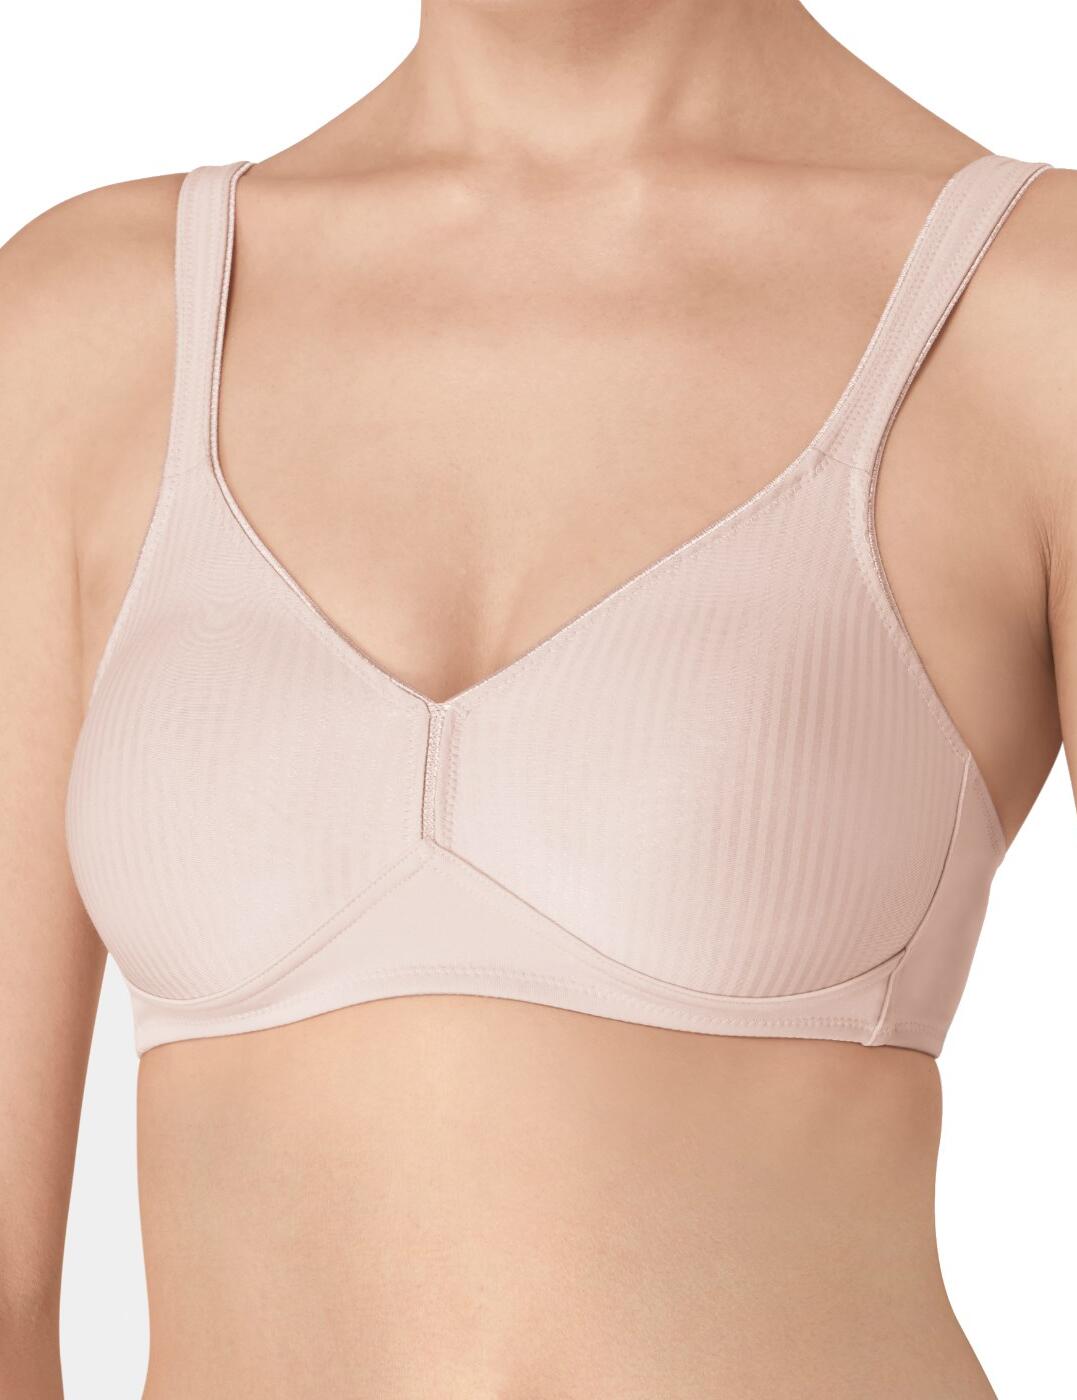 Buy Triumph Modern Soft Cotton Non Wired Bra from the Next UK